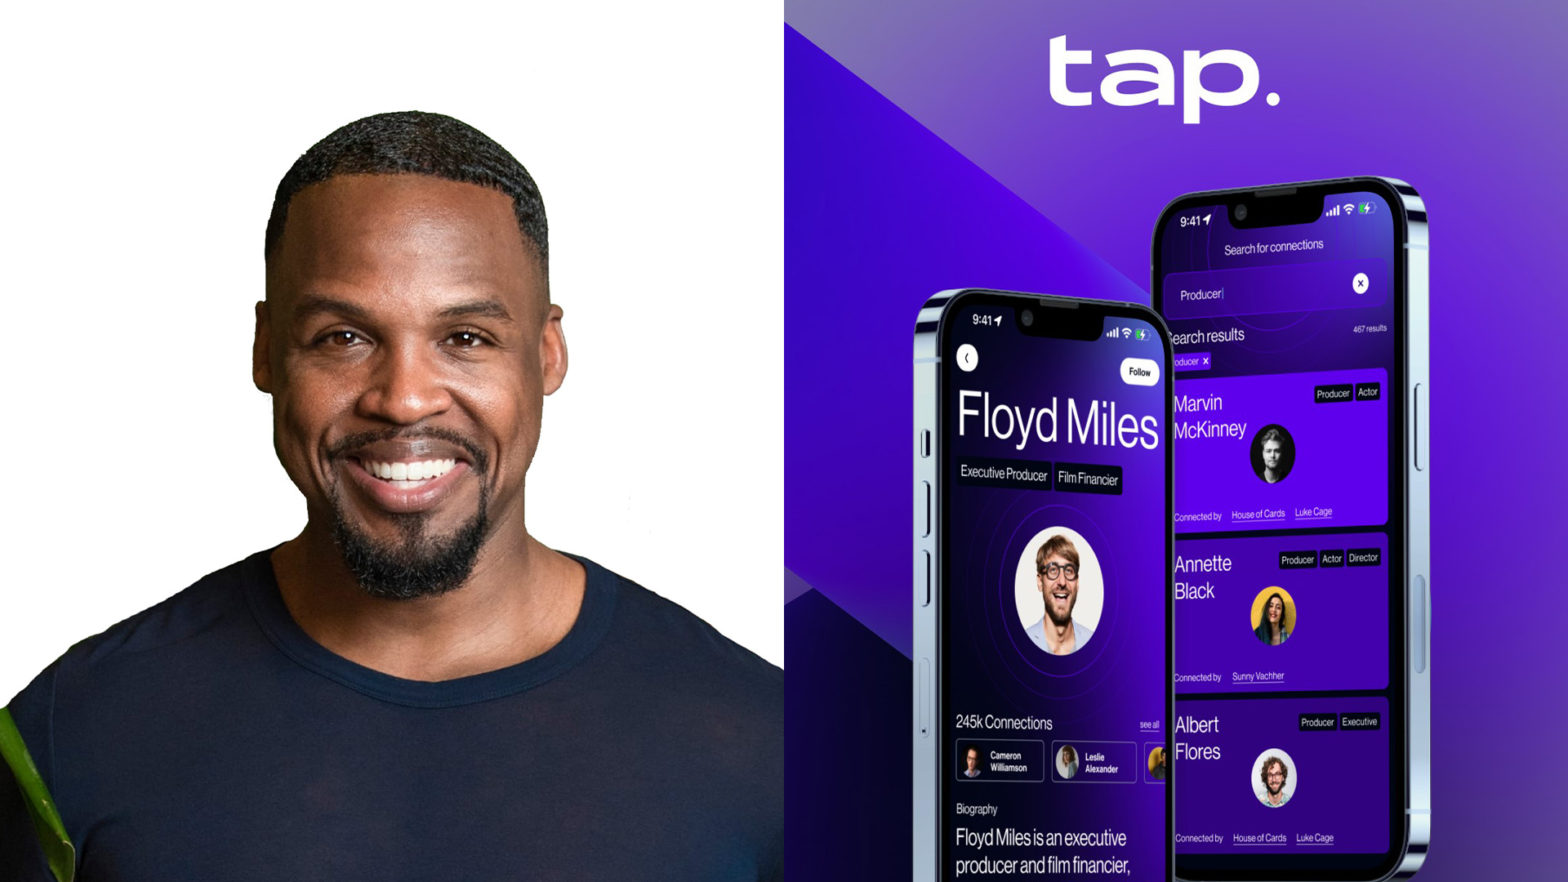 AI Startup tap. Takes On The Entertainment Industry, Raises $1.8M In Pre-Seed Funding Round